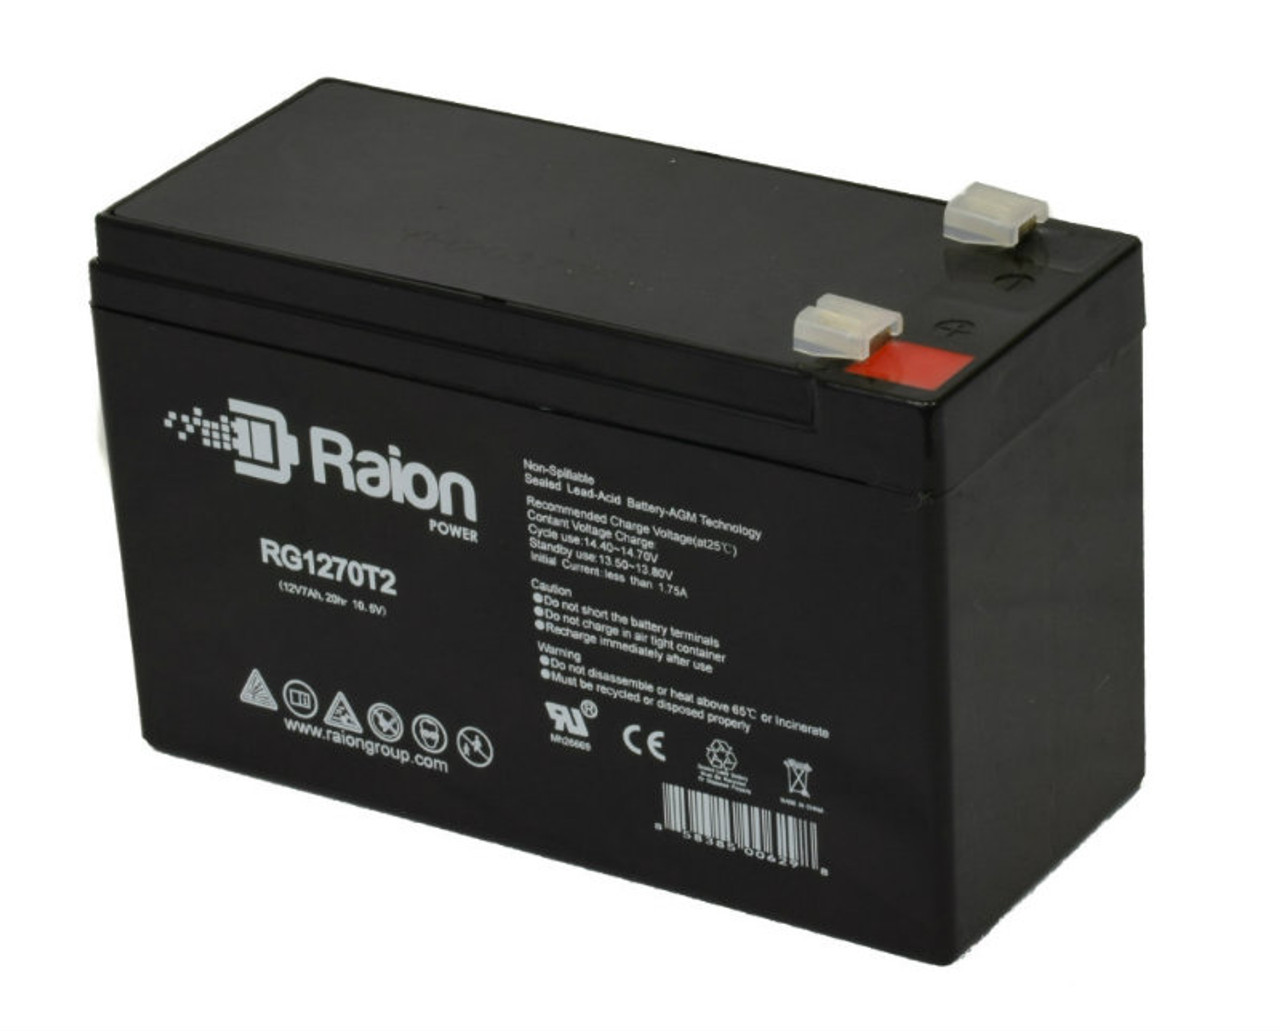 Raion Power RG1270T1 12V 7Ah Non-Spillable Replacement Battery for Weida HXD12-7 F1